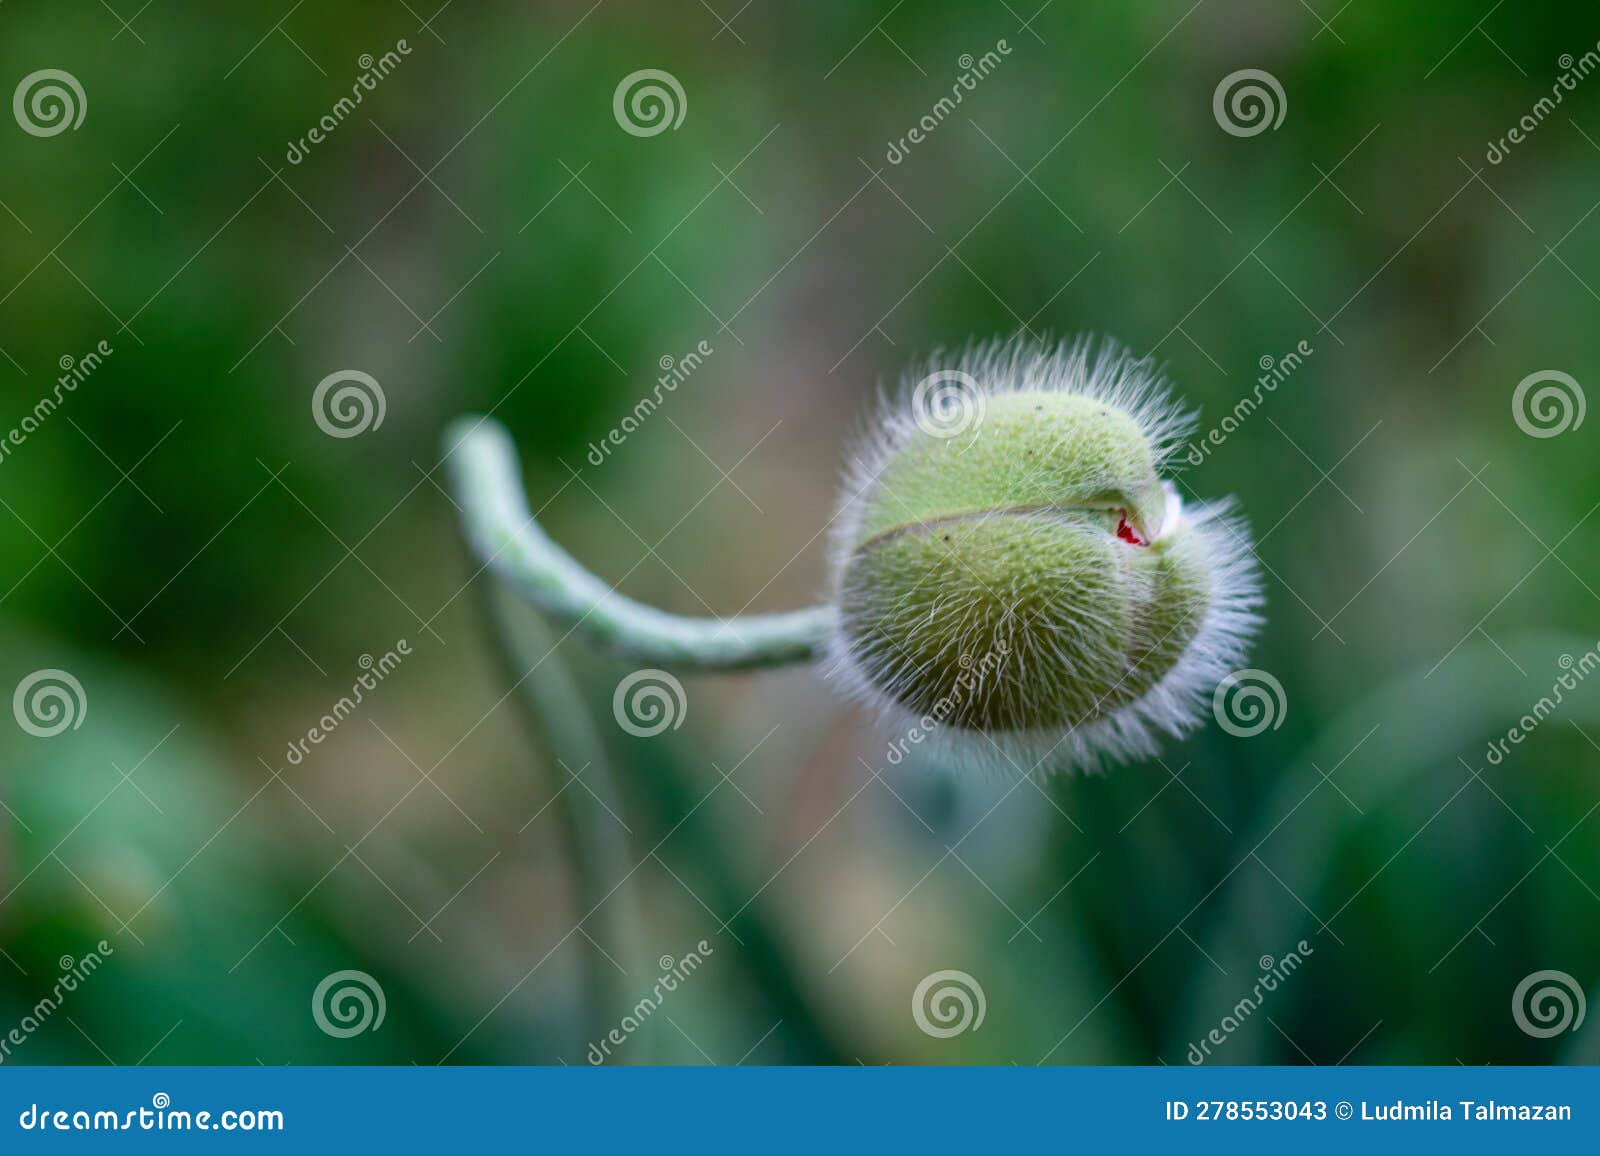 poppy flower bud, concept of reproduction, fertilization, cell and sperm